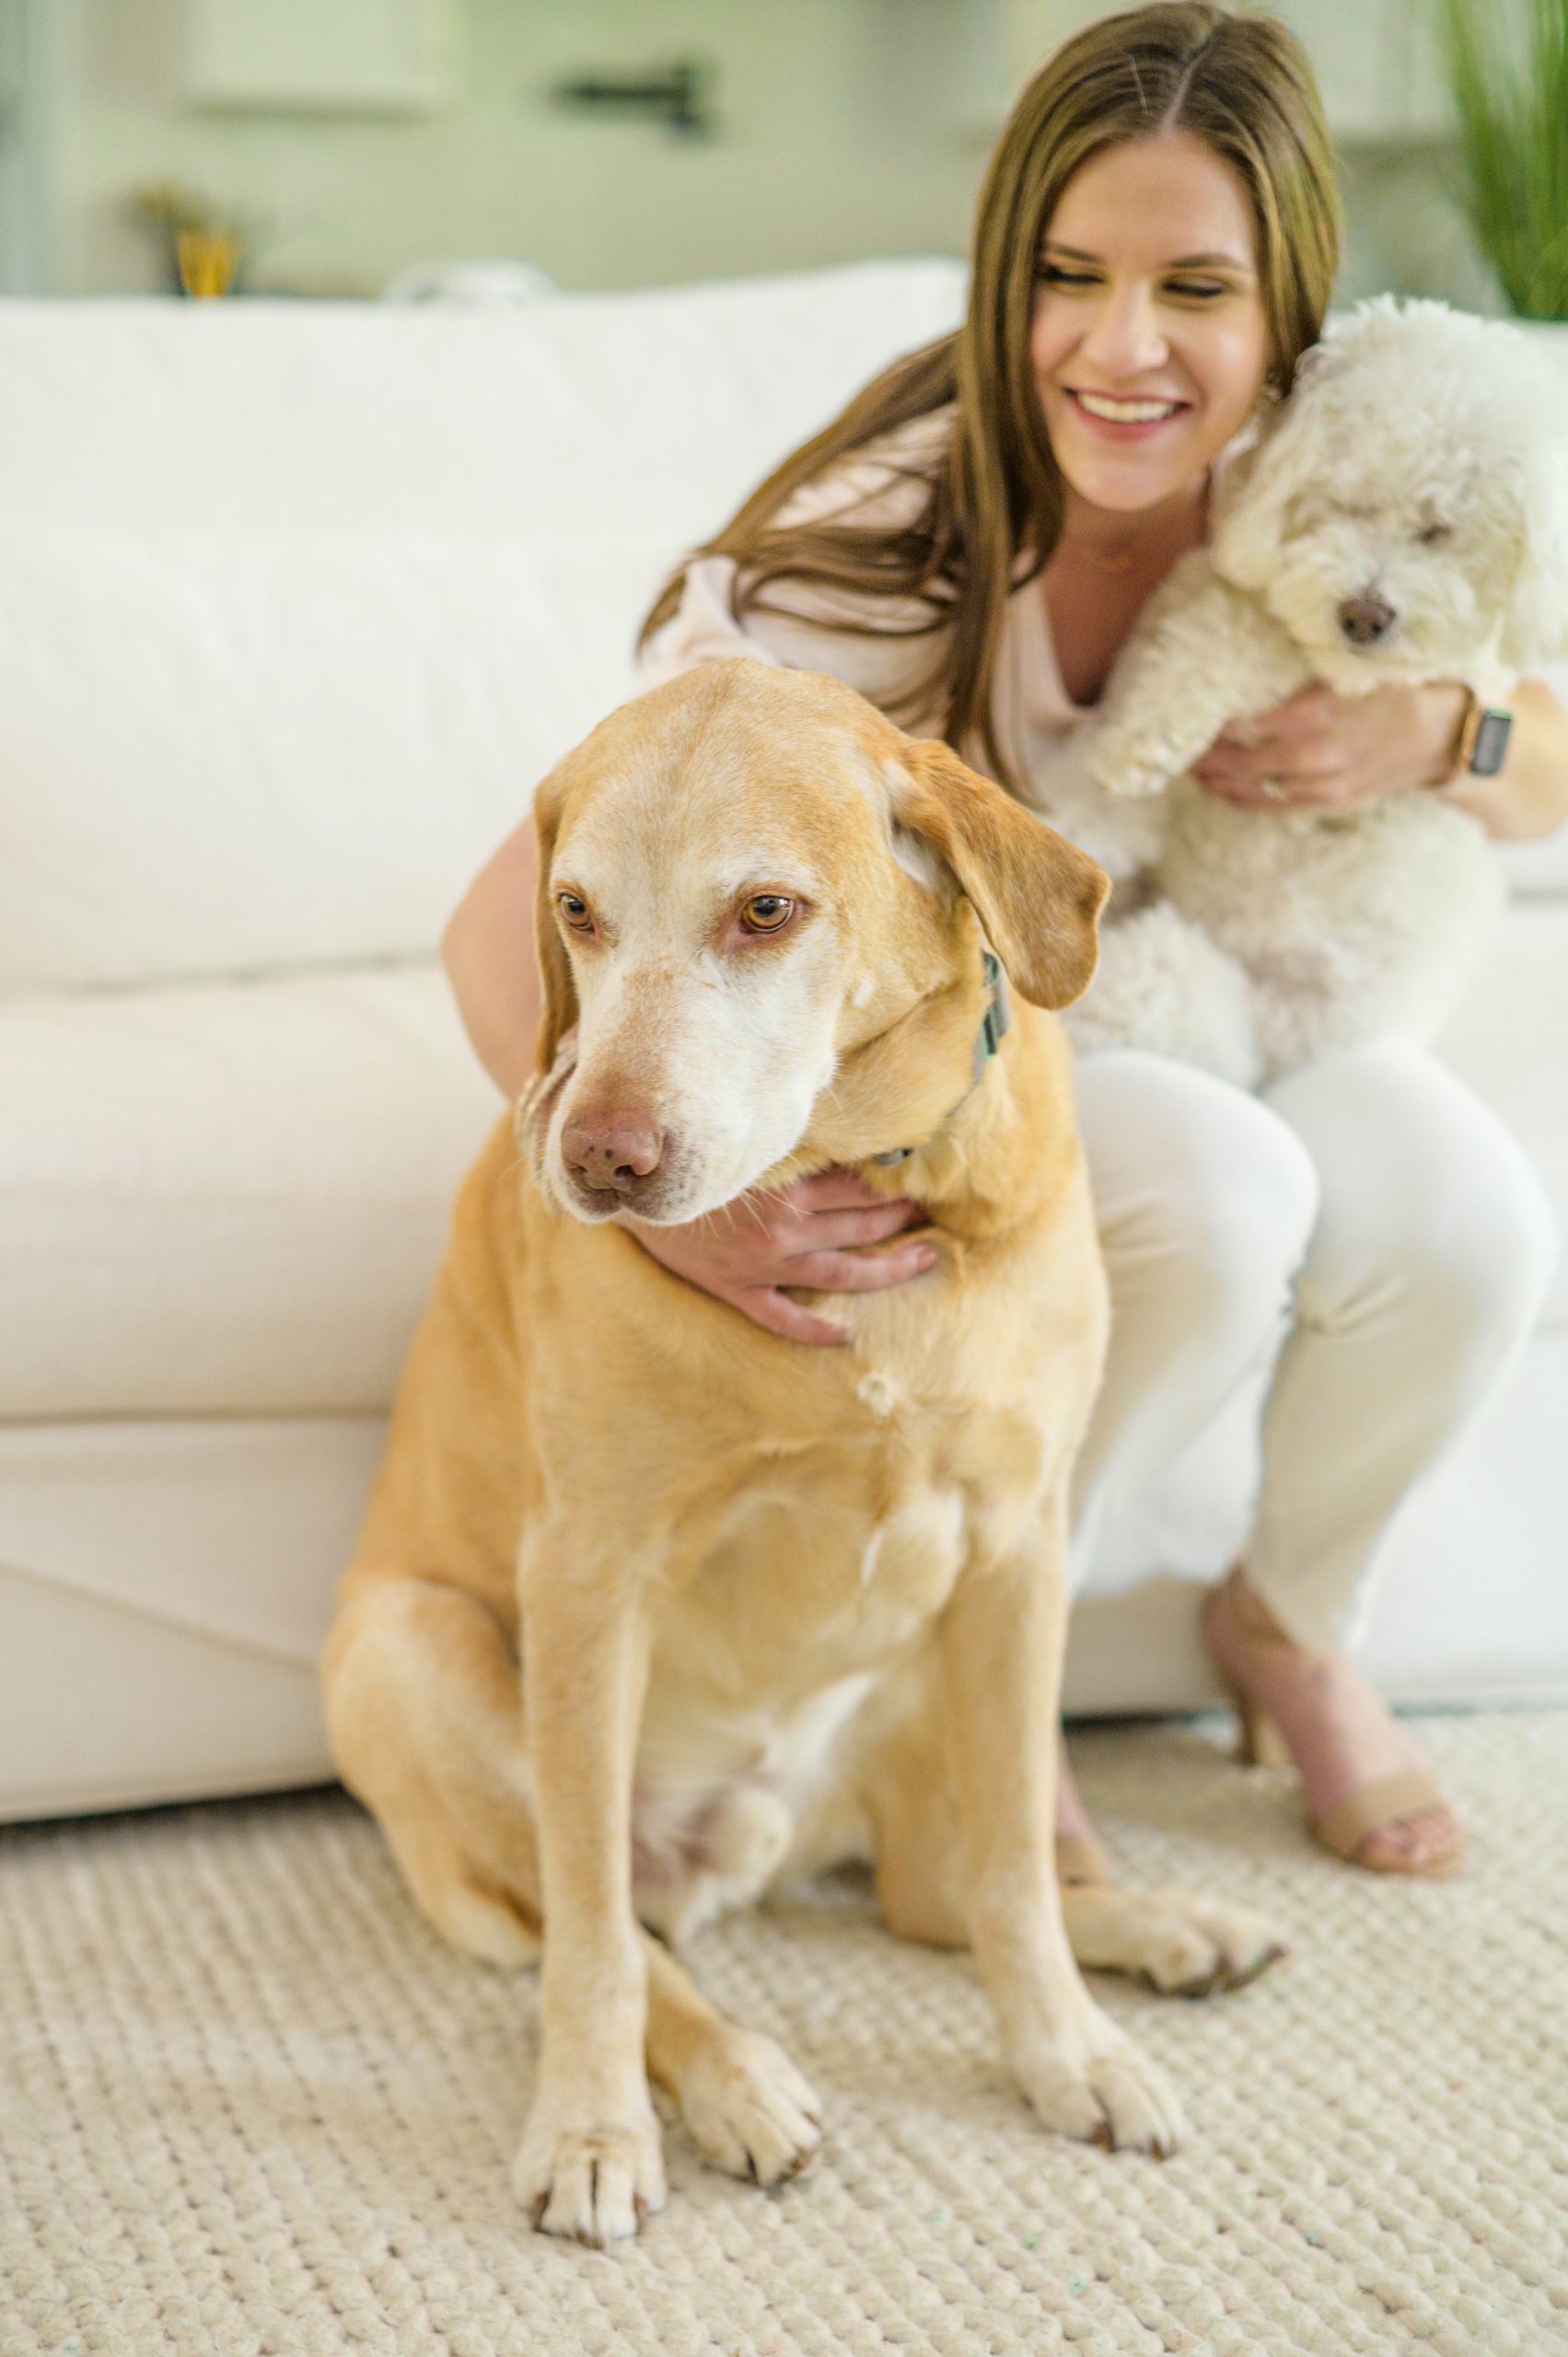 Stacey Caito, Chantilly Realtor, snuggles her dogs during her brand session photographed by Virginia brand photographer, Cait Kramer Photography